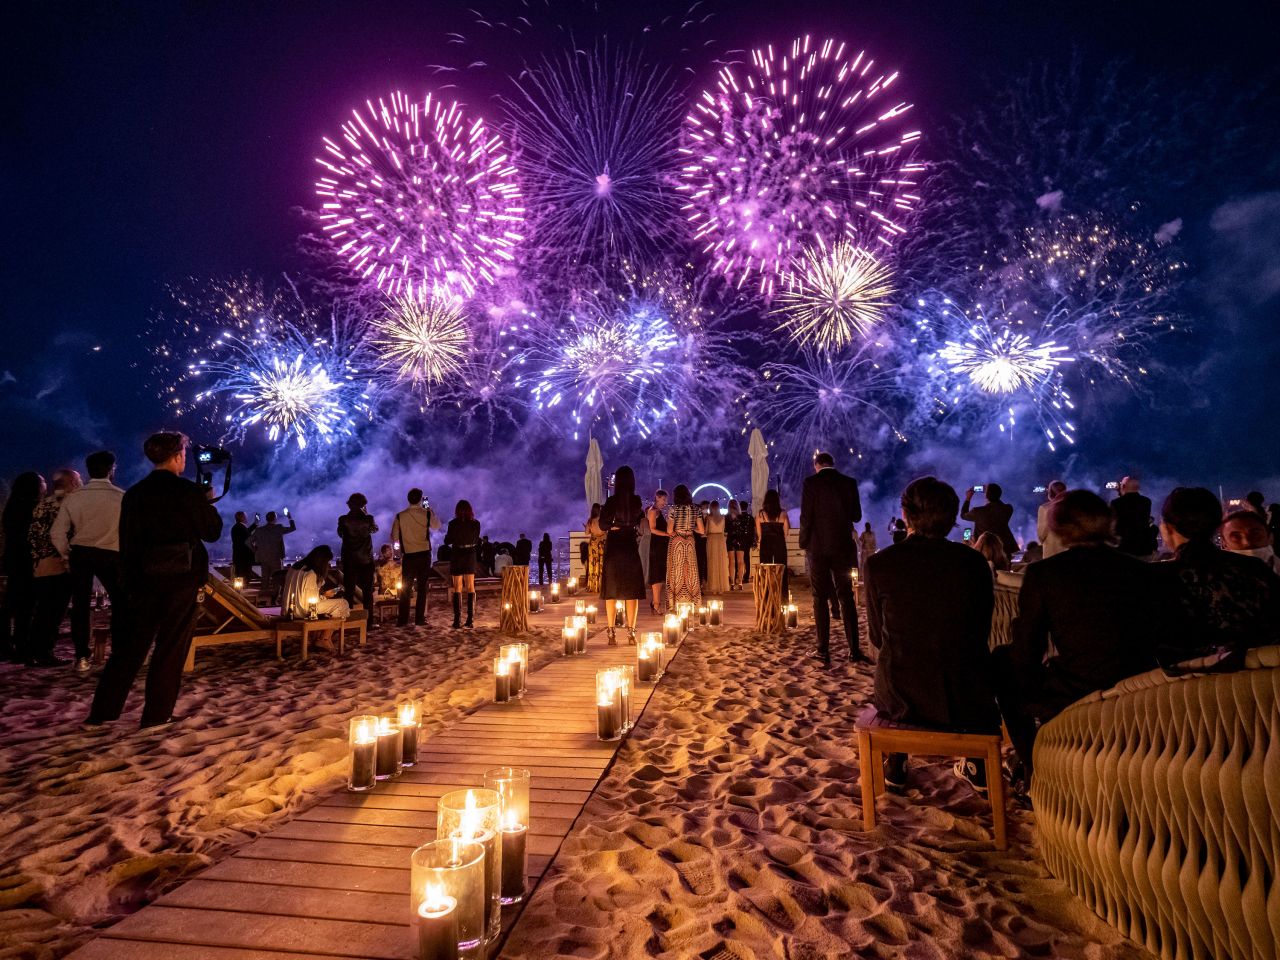 People watch Bastille Day fireworks from a beach in Cannes, France, during the Cannes Film Festival on Wednesday, July 14.